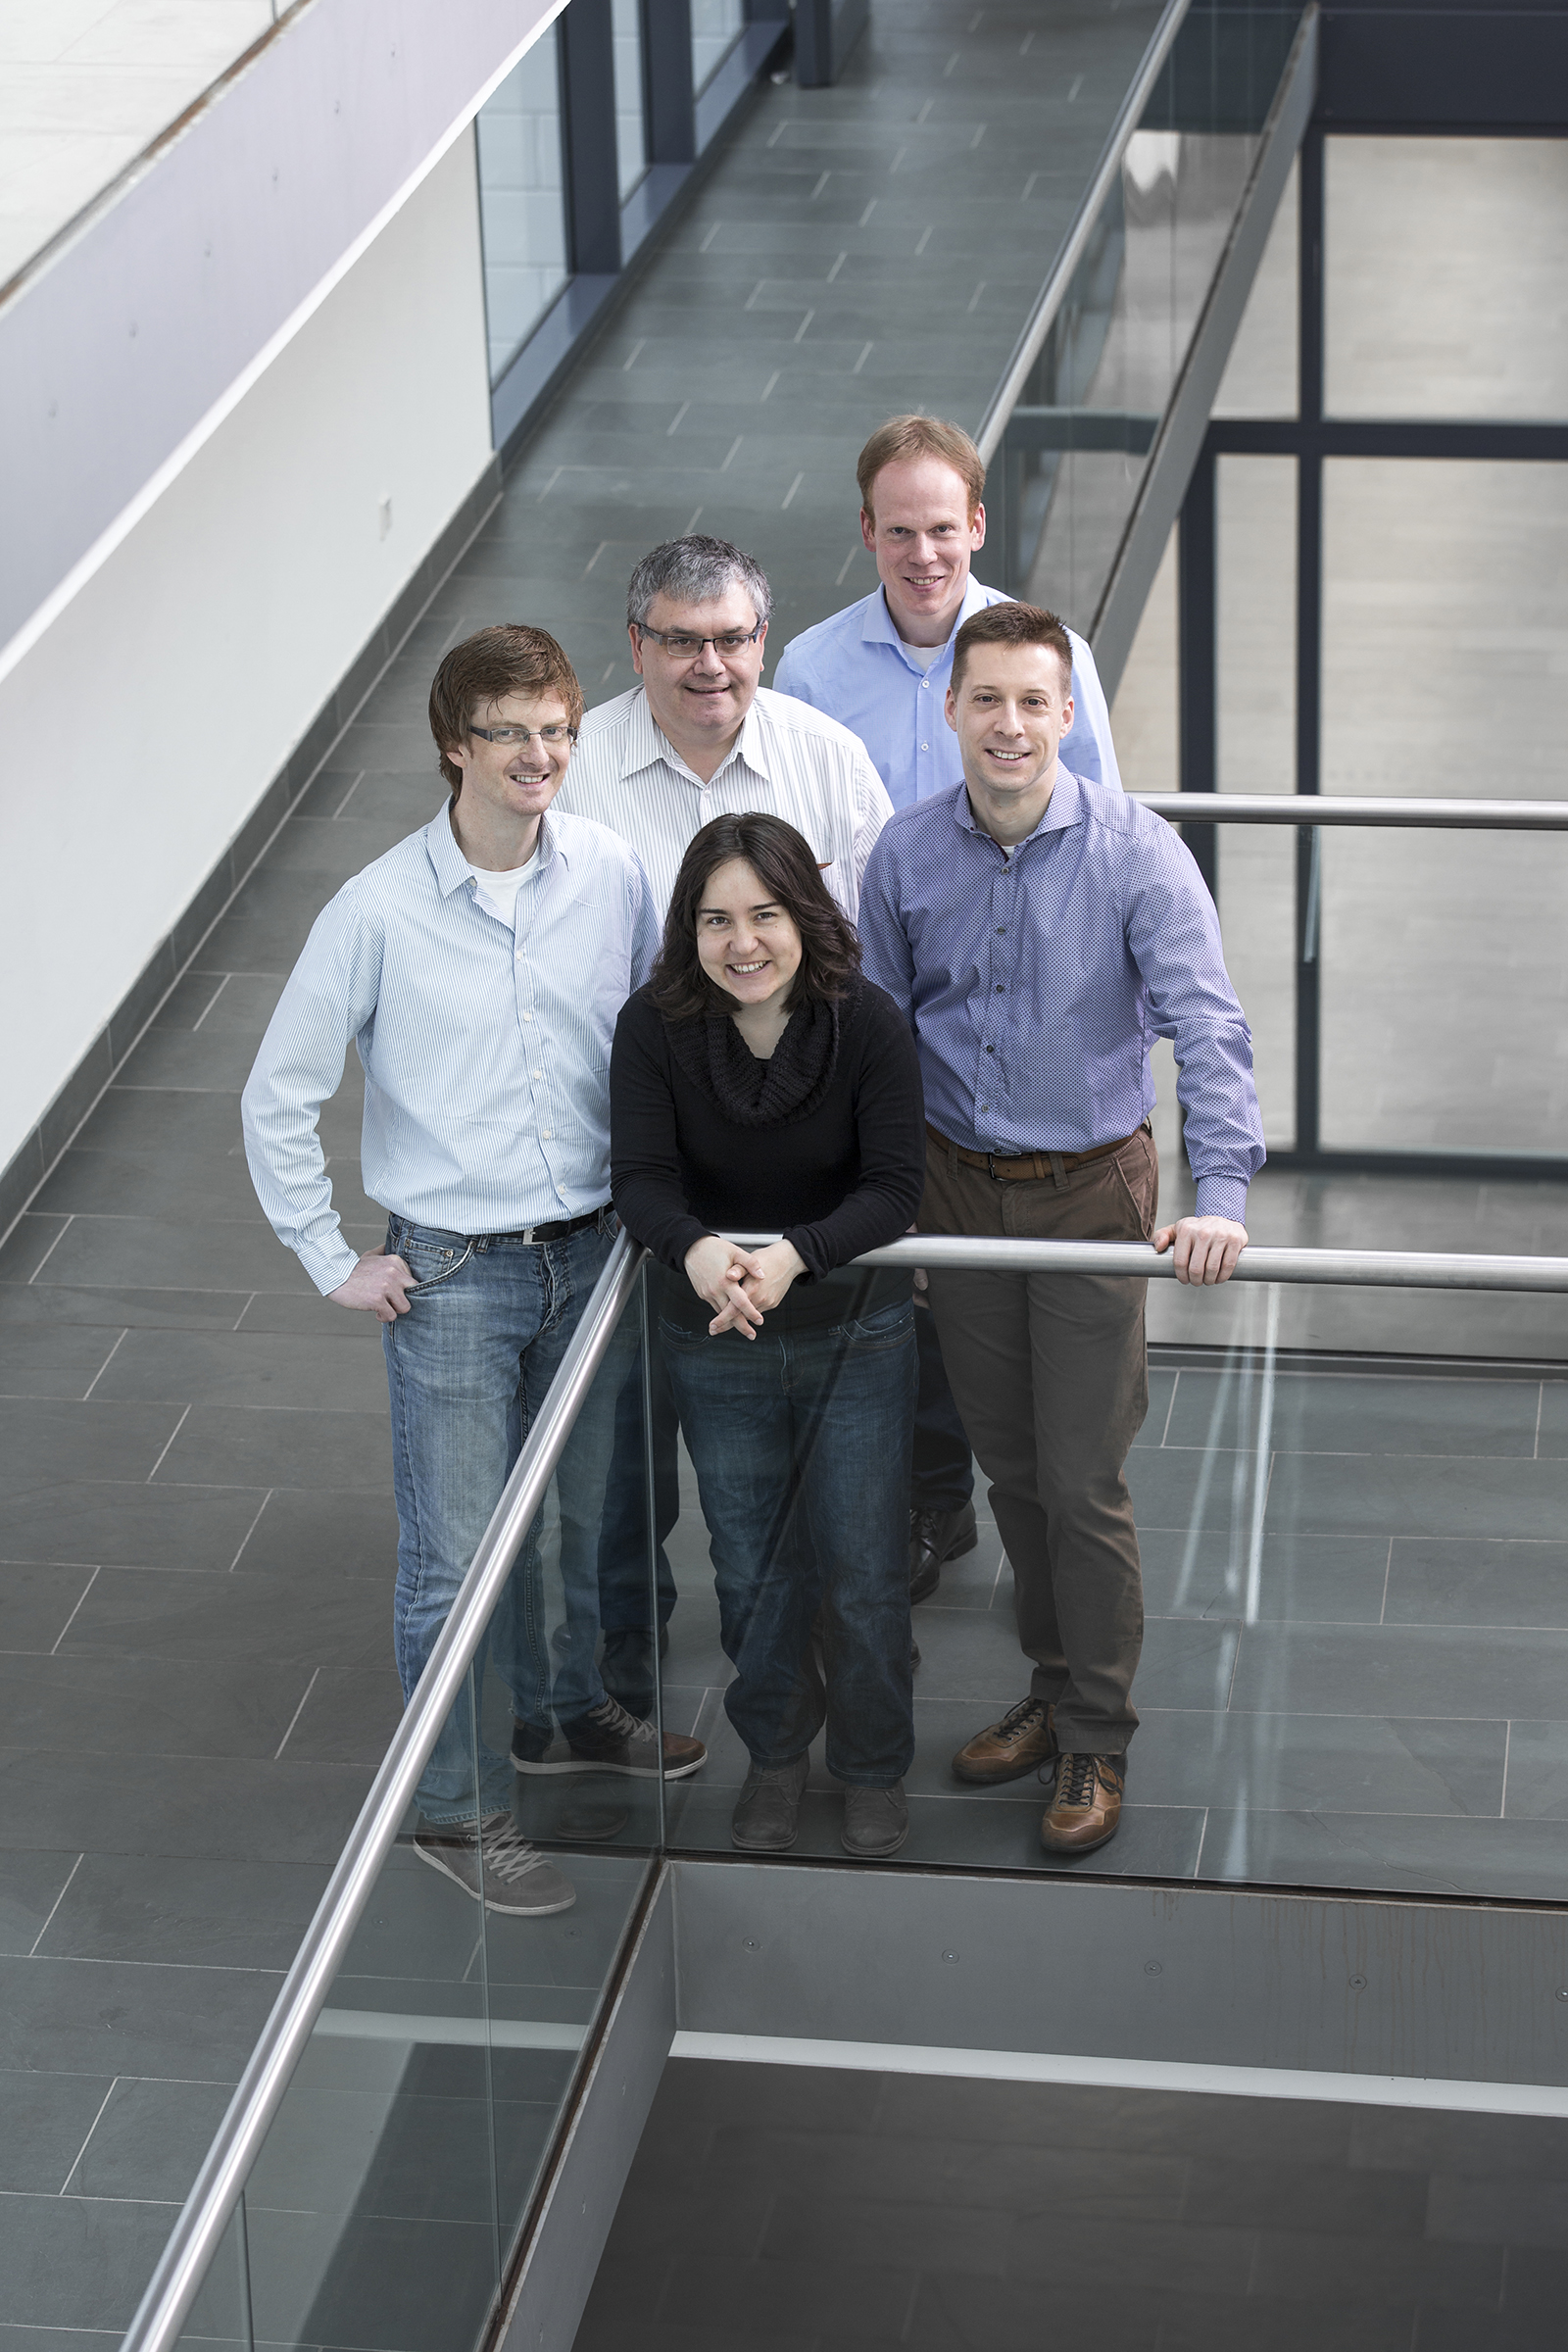 By developing an interactive and easy-to-use software product, Dr. Philipp Süss, Prof. Dr. Karl-Heinz Küfer, Dr. Katrin Teichert, Dr. Michael Bortz and Dr. Alexander Scherrer (from the left) have helped improve cancer patients‘ chances of recovery.